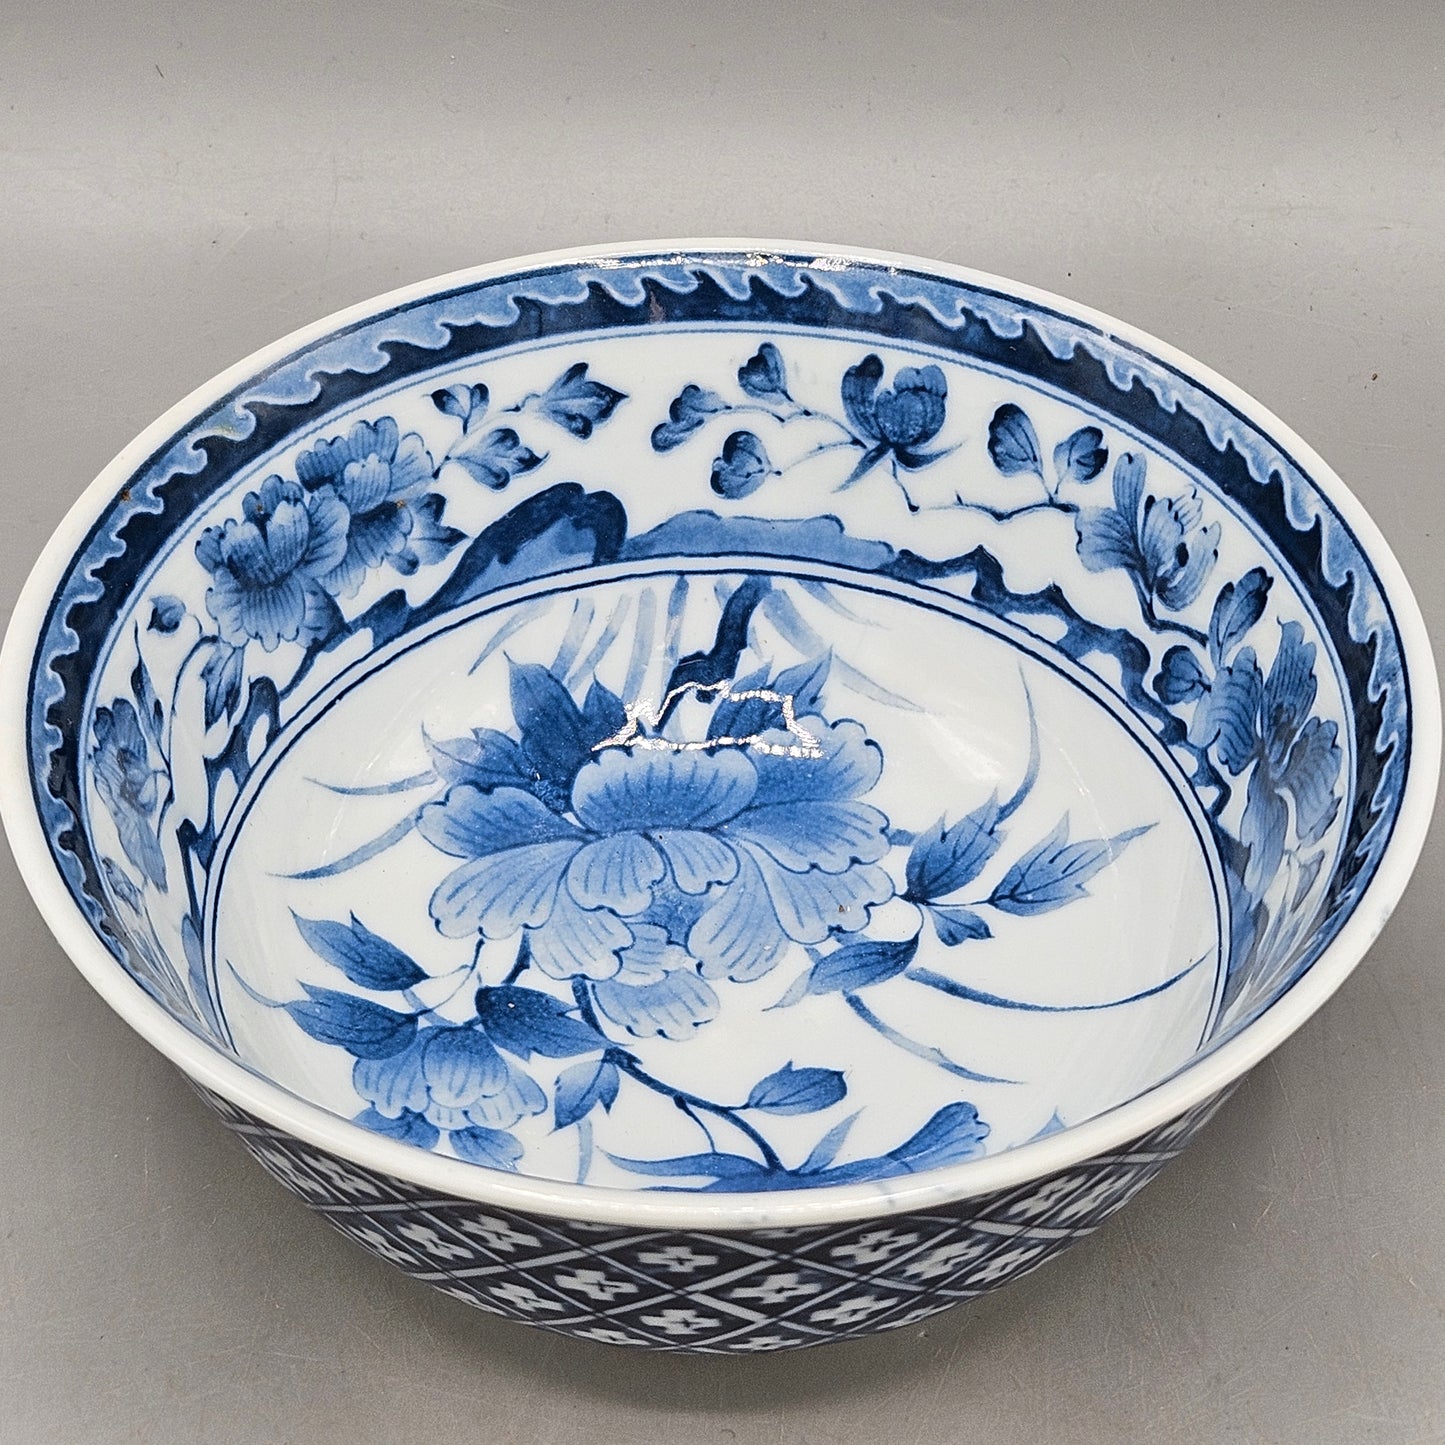 Vintage Porcelain Blue and White Flowers Bowl Made in Japanese